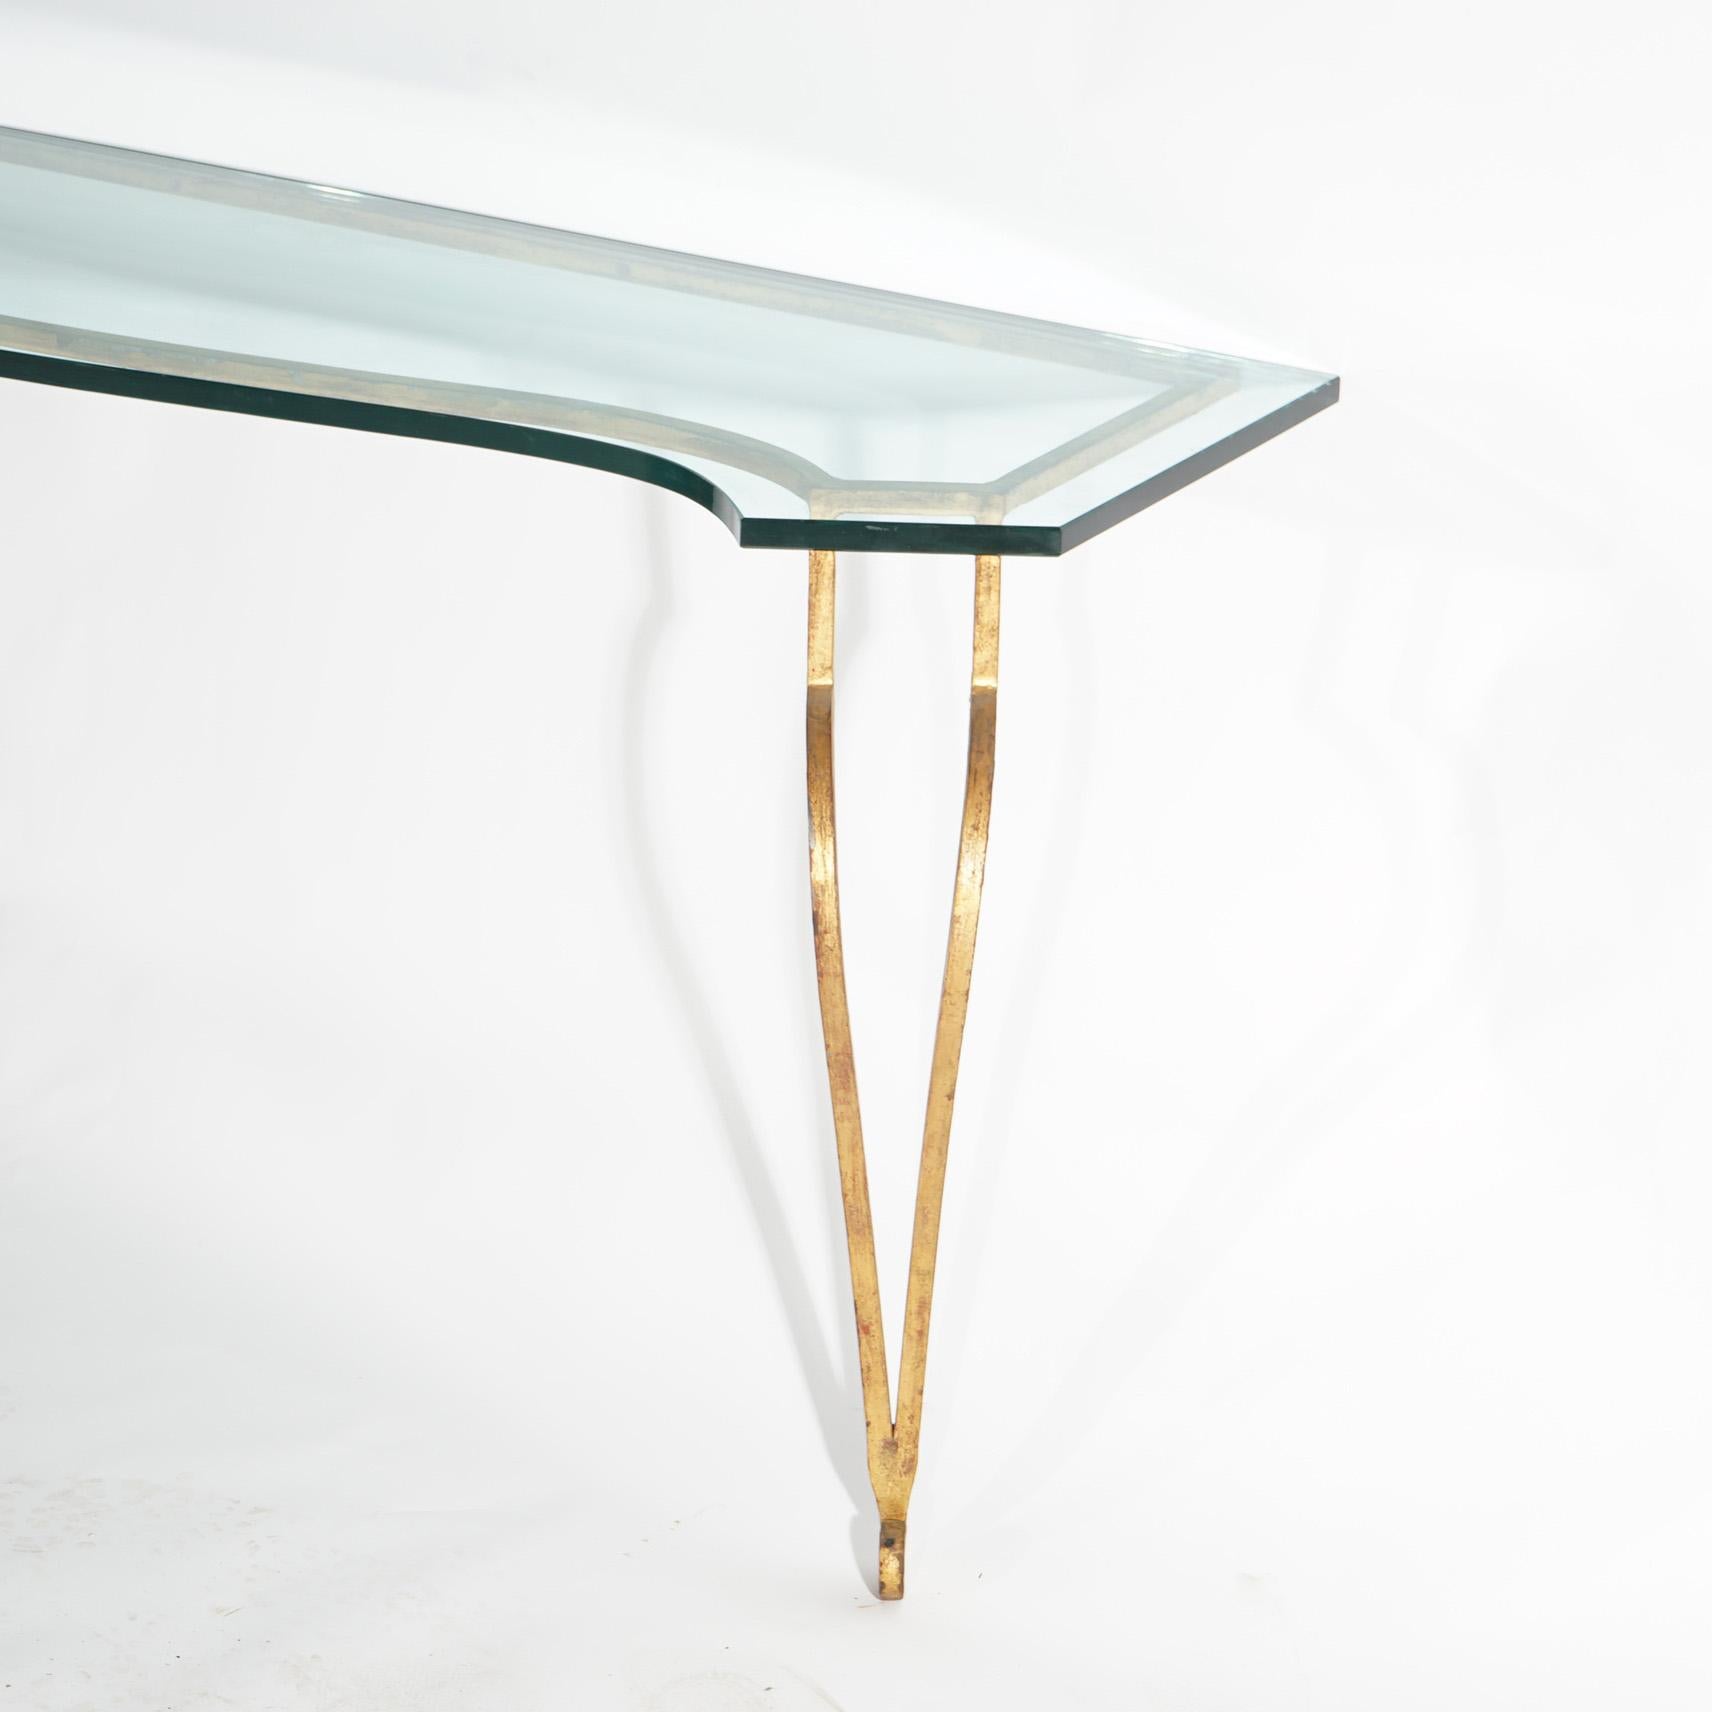 Italian Gold Gilt Wrought Iron Console Table with Glass Top 20th C For Sale 2